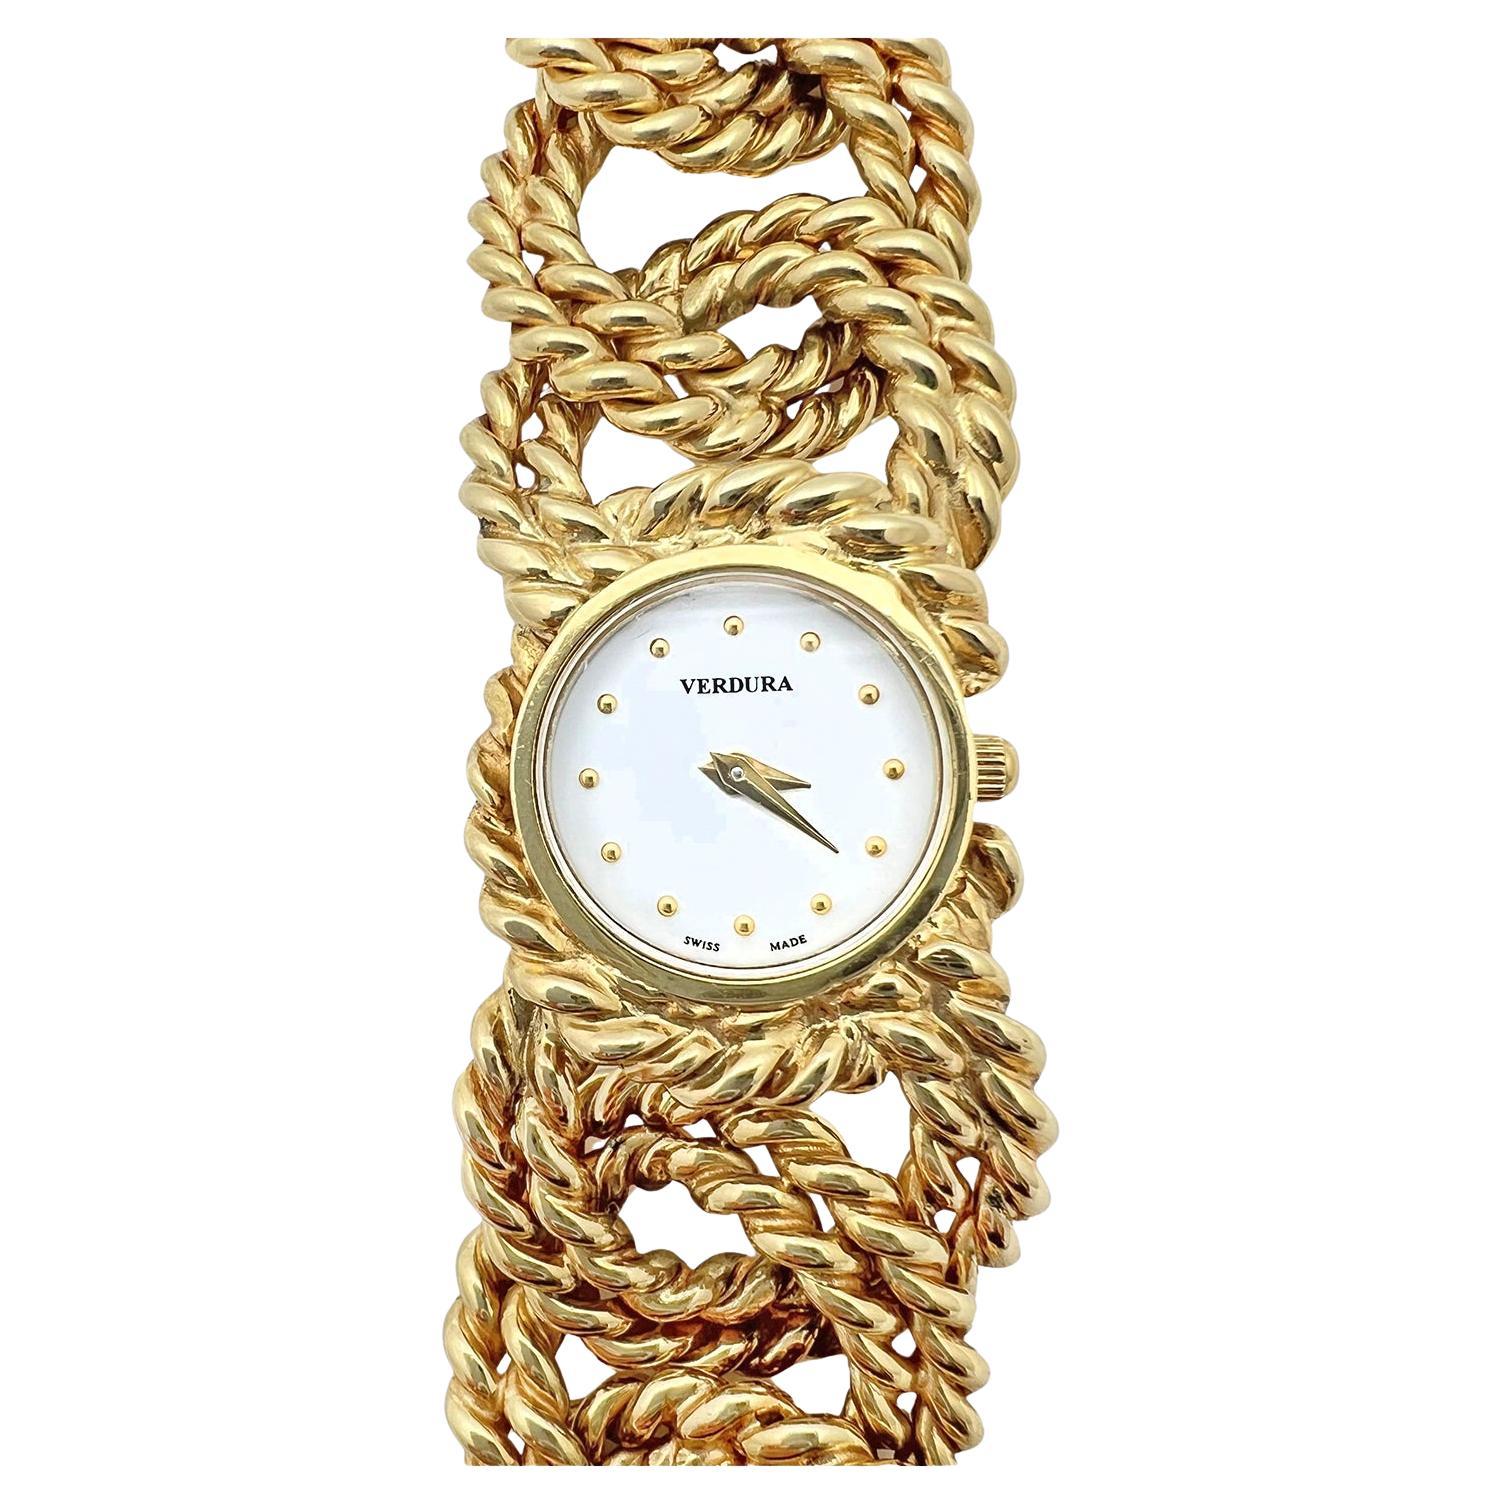 Verdura 18k yellow gold double rope link bracelet watch, featuring a circular white lacquered dial with applied gold dots for hour markers.  Dial marked 